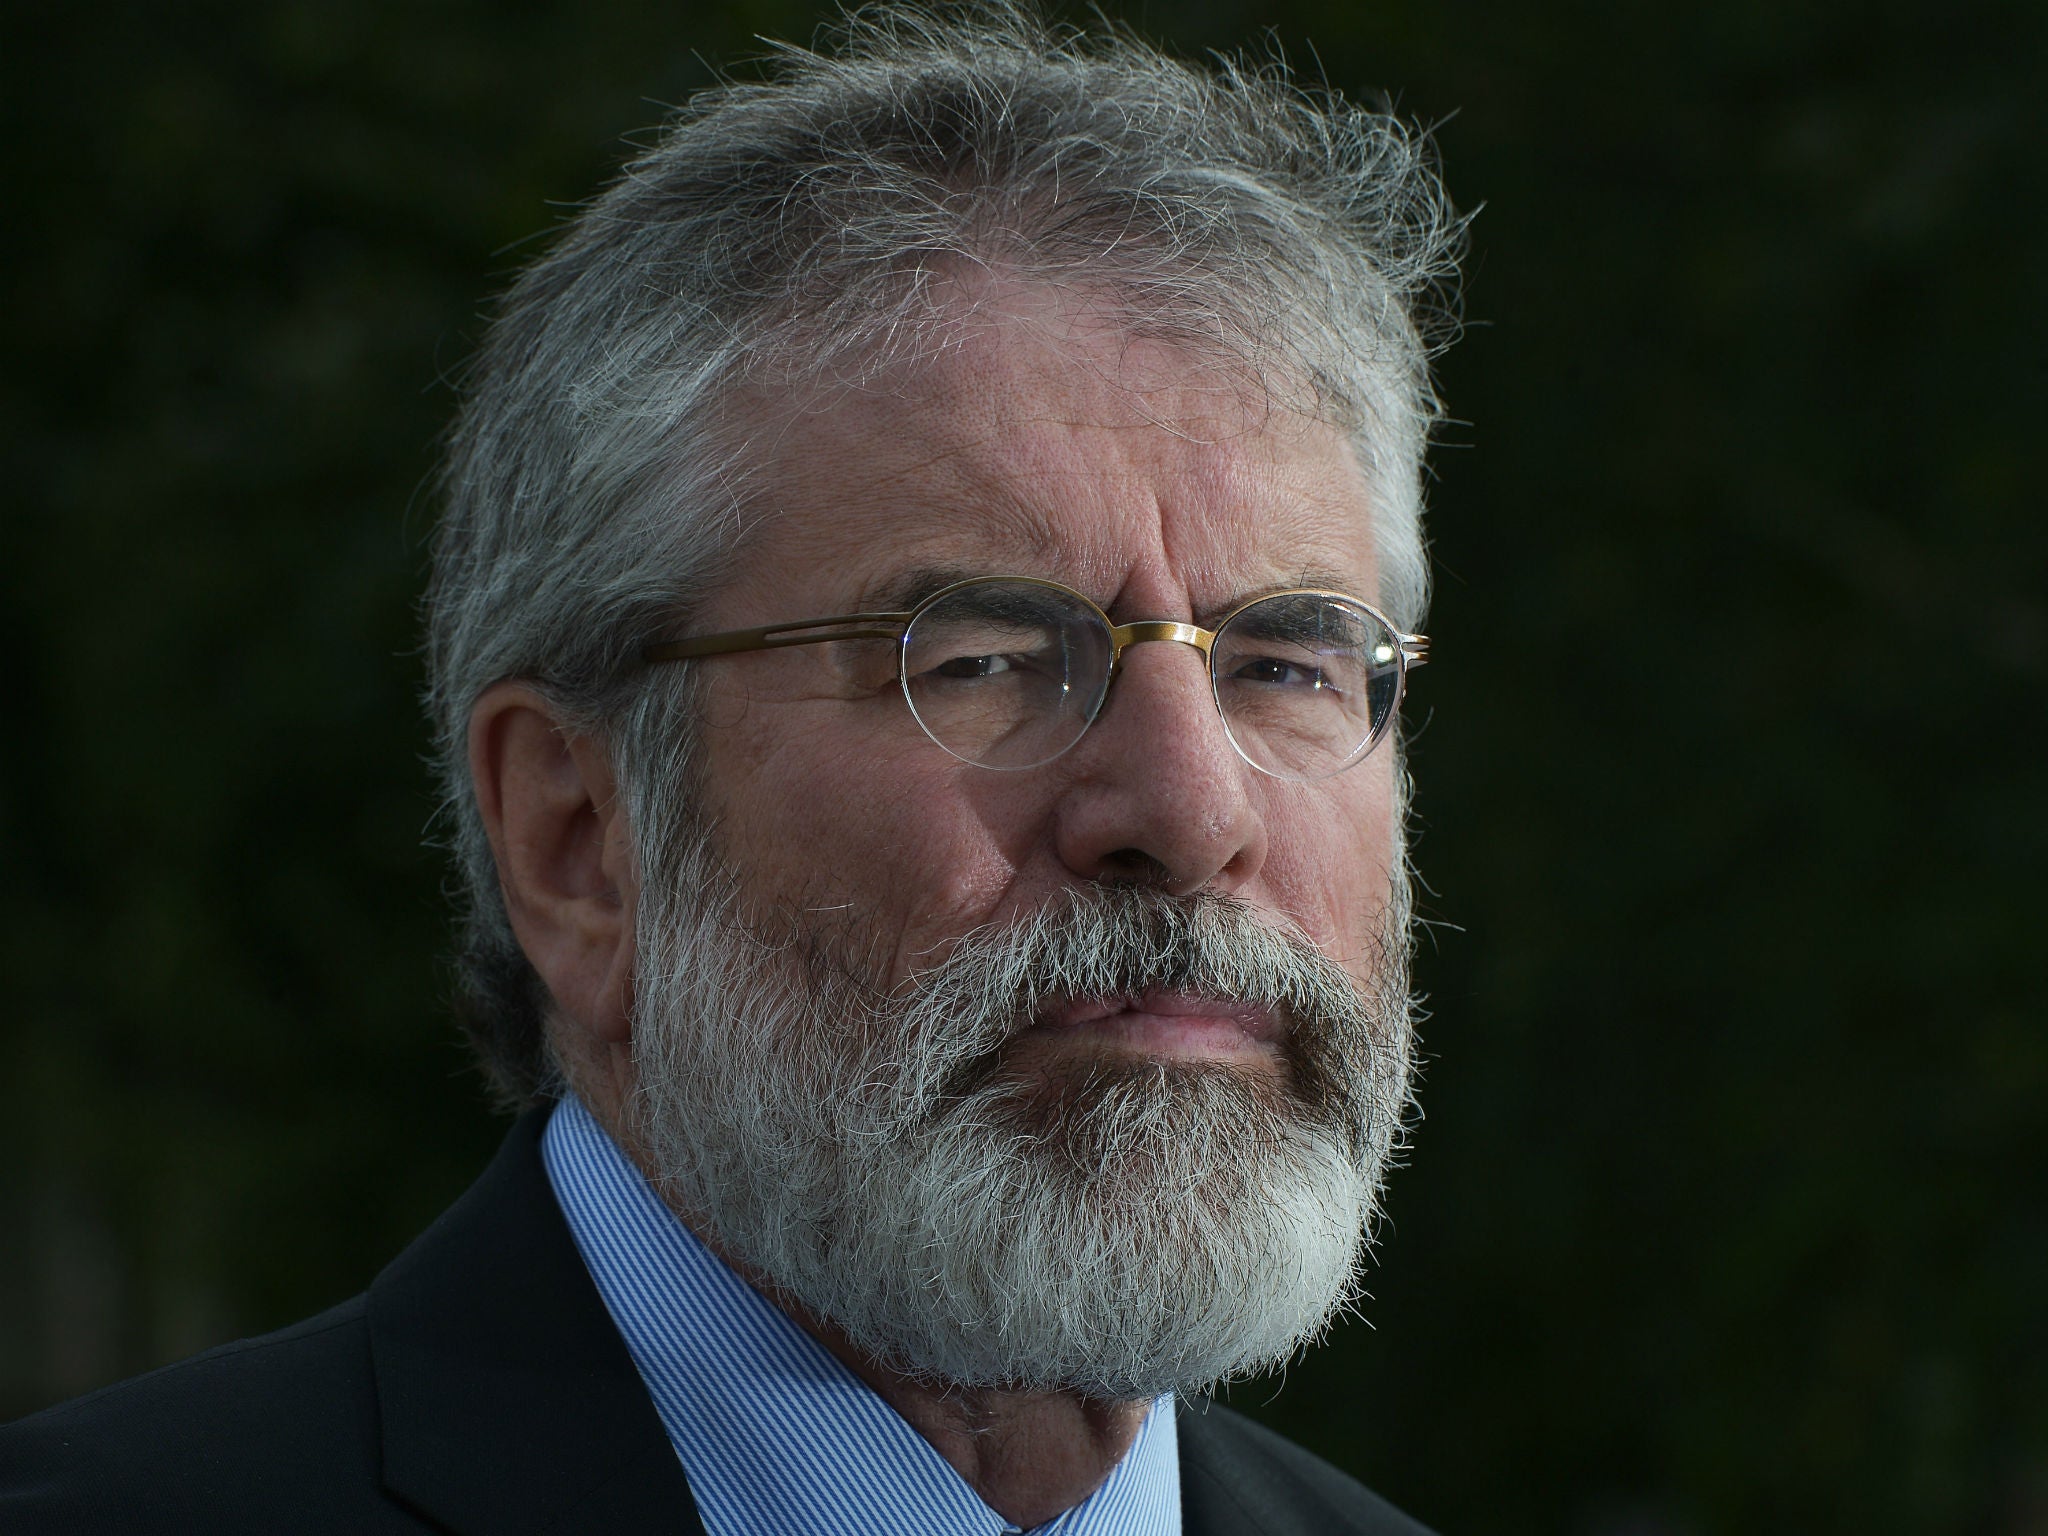 Gerry Adams continues to insist there is no basis for any negotiations with the Democratic Unionists